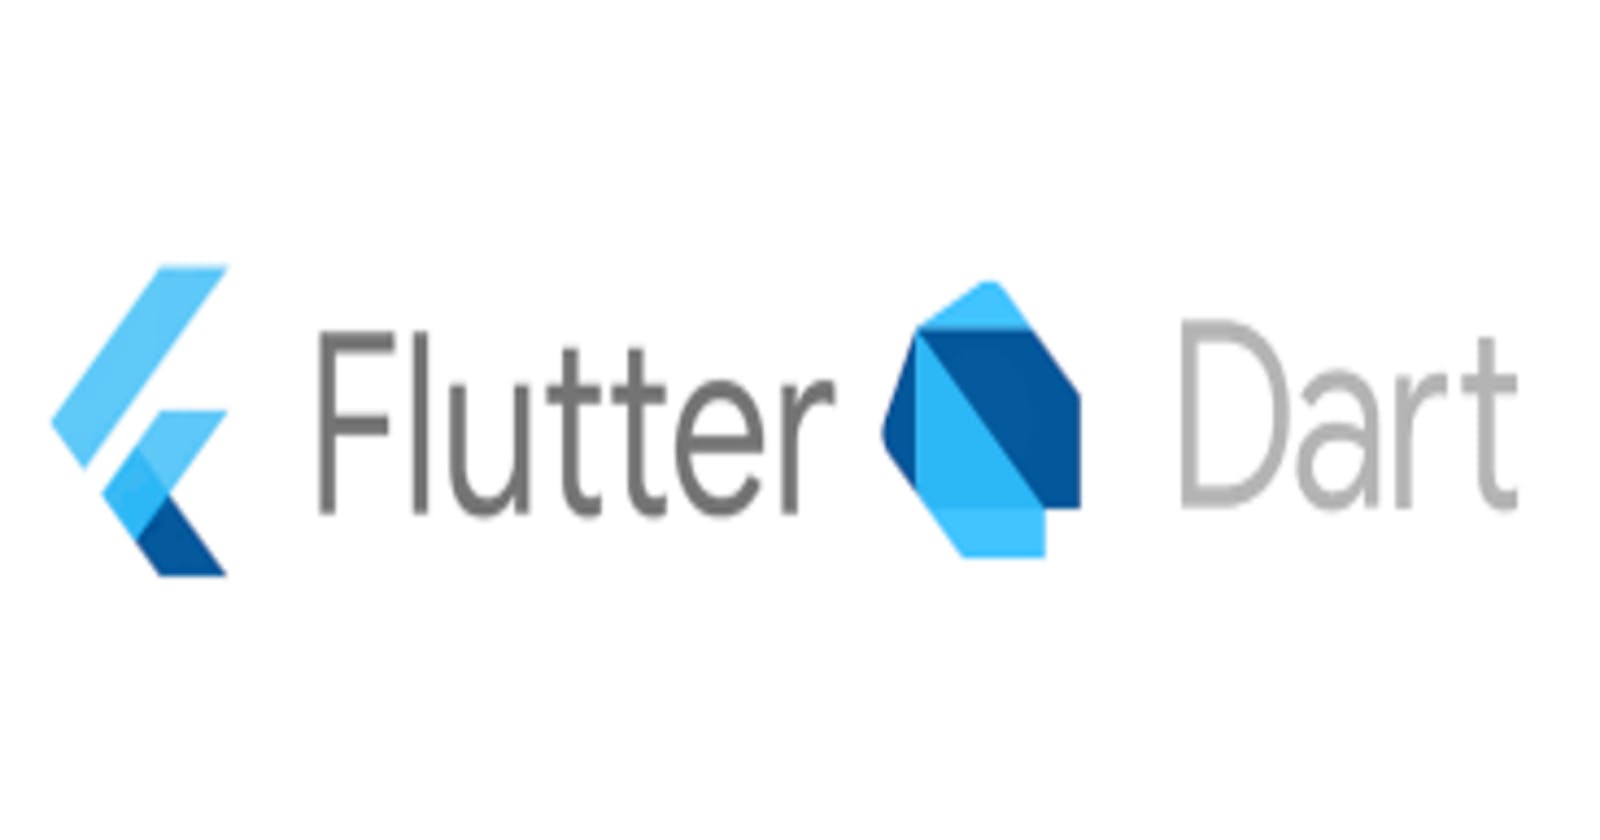 What is Flutter and Dart?